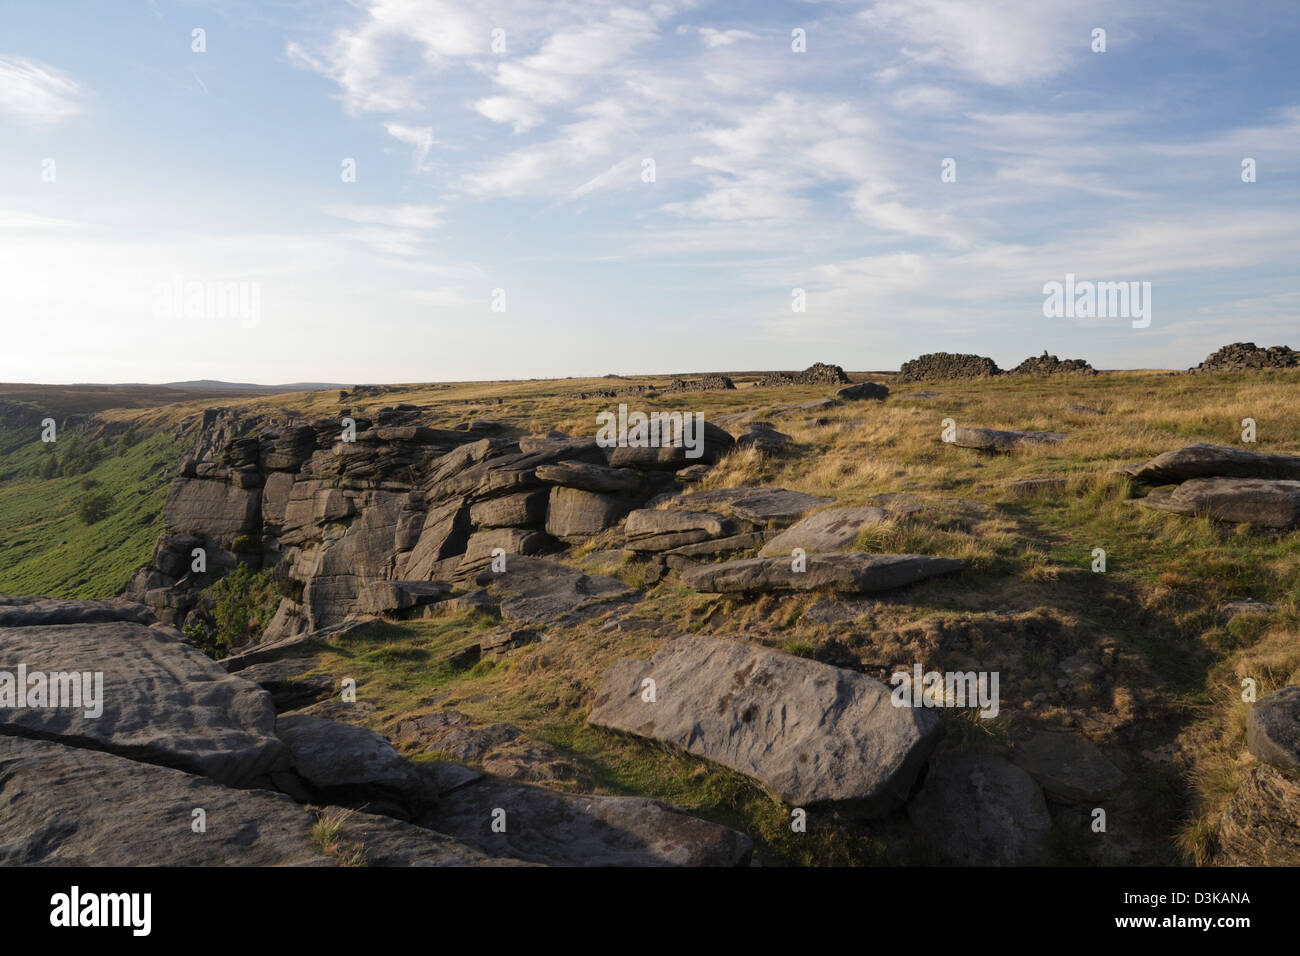 Rocks on Stanage Edge in the Peak District, Moorland landscape England Stock Photo